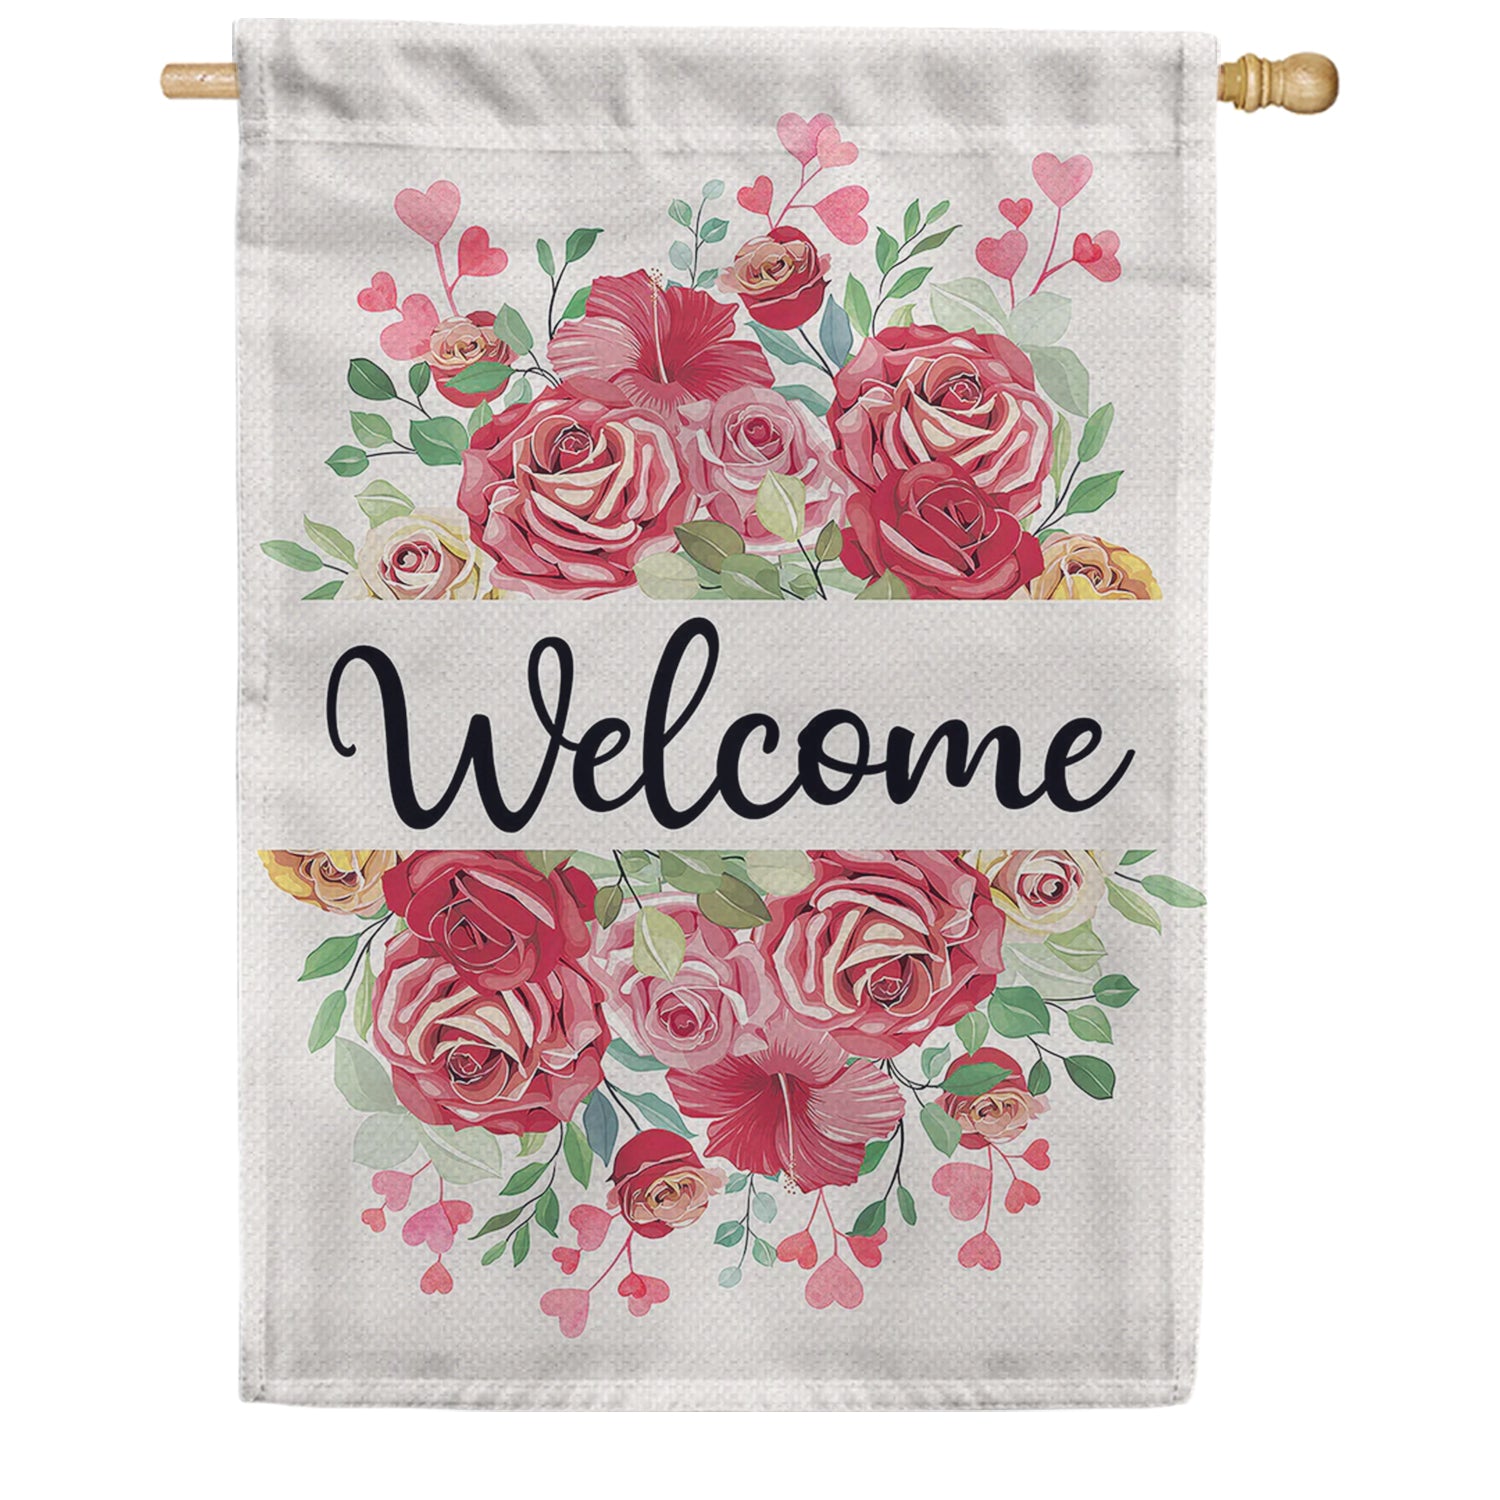 Welcome Hearts and Flowers House Flag